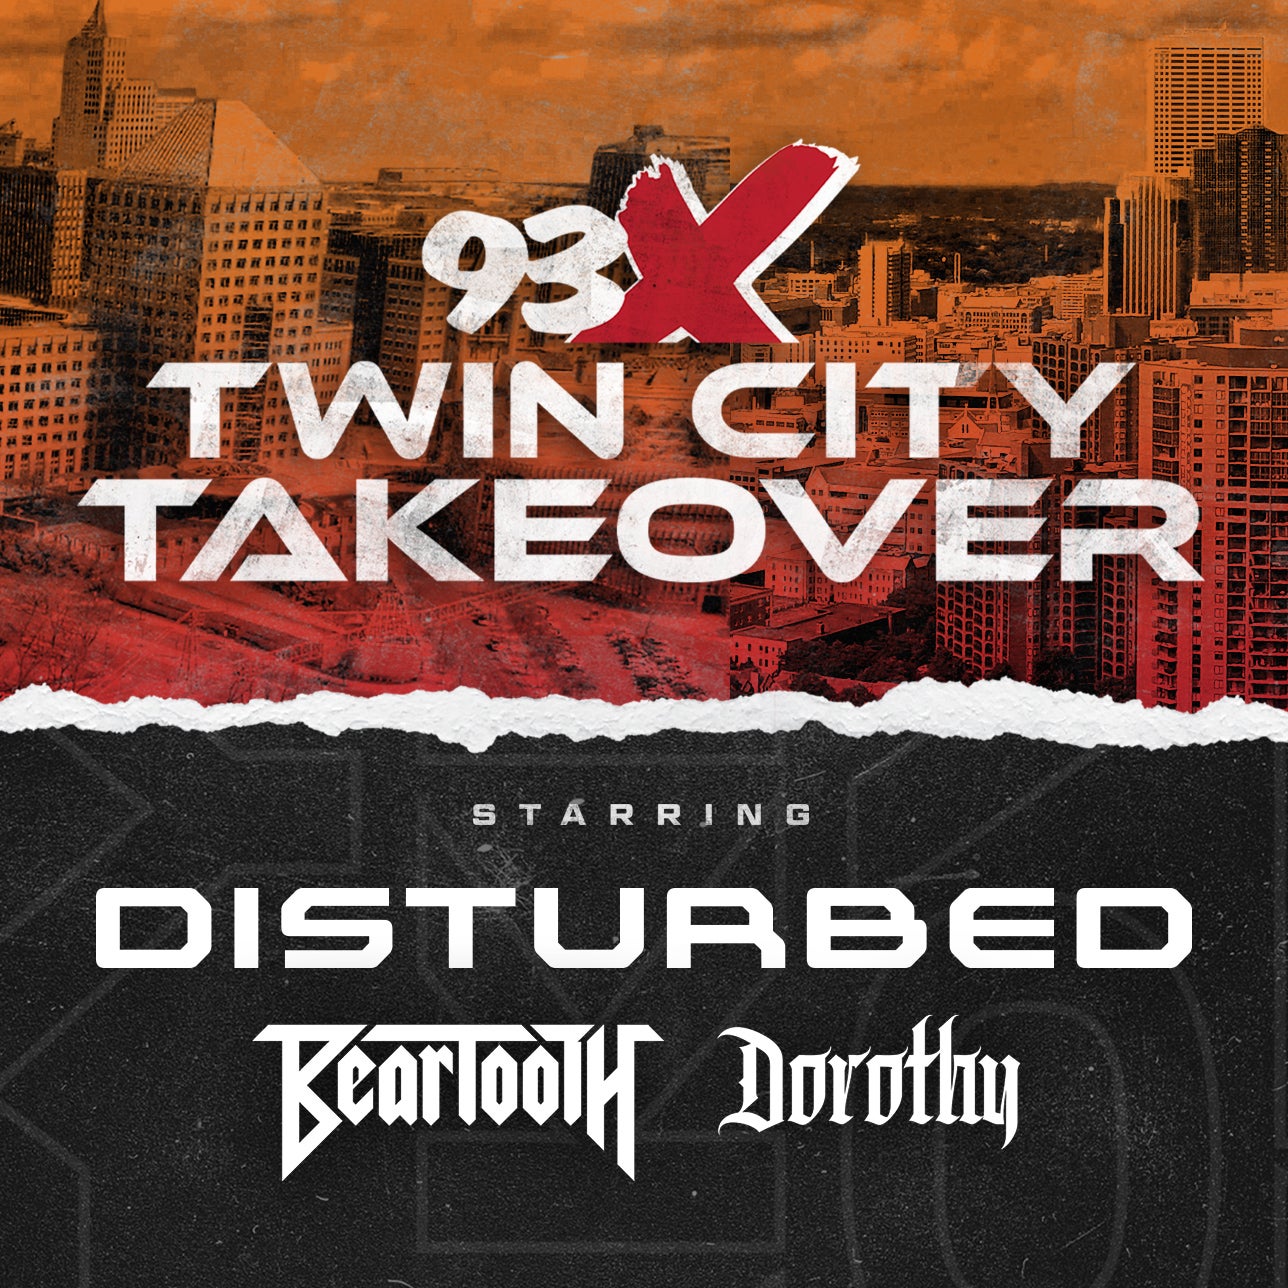 93X Twin City Takeover starring Disturbed